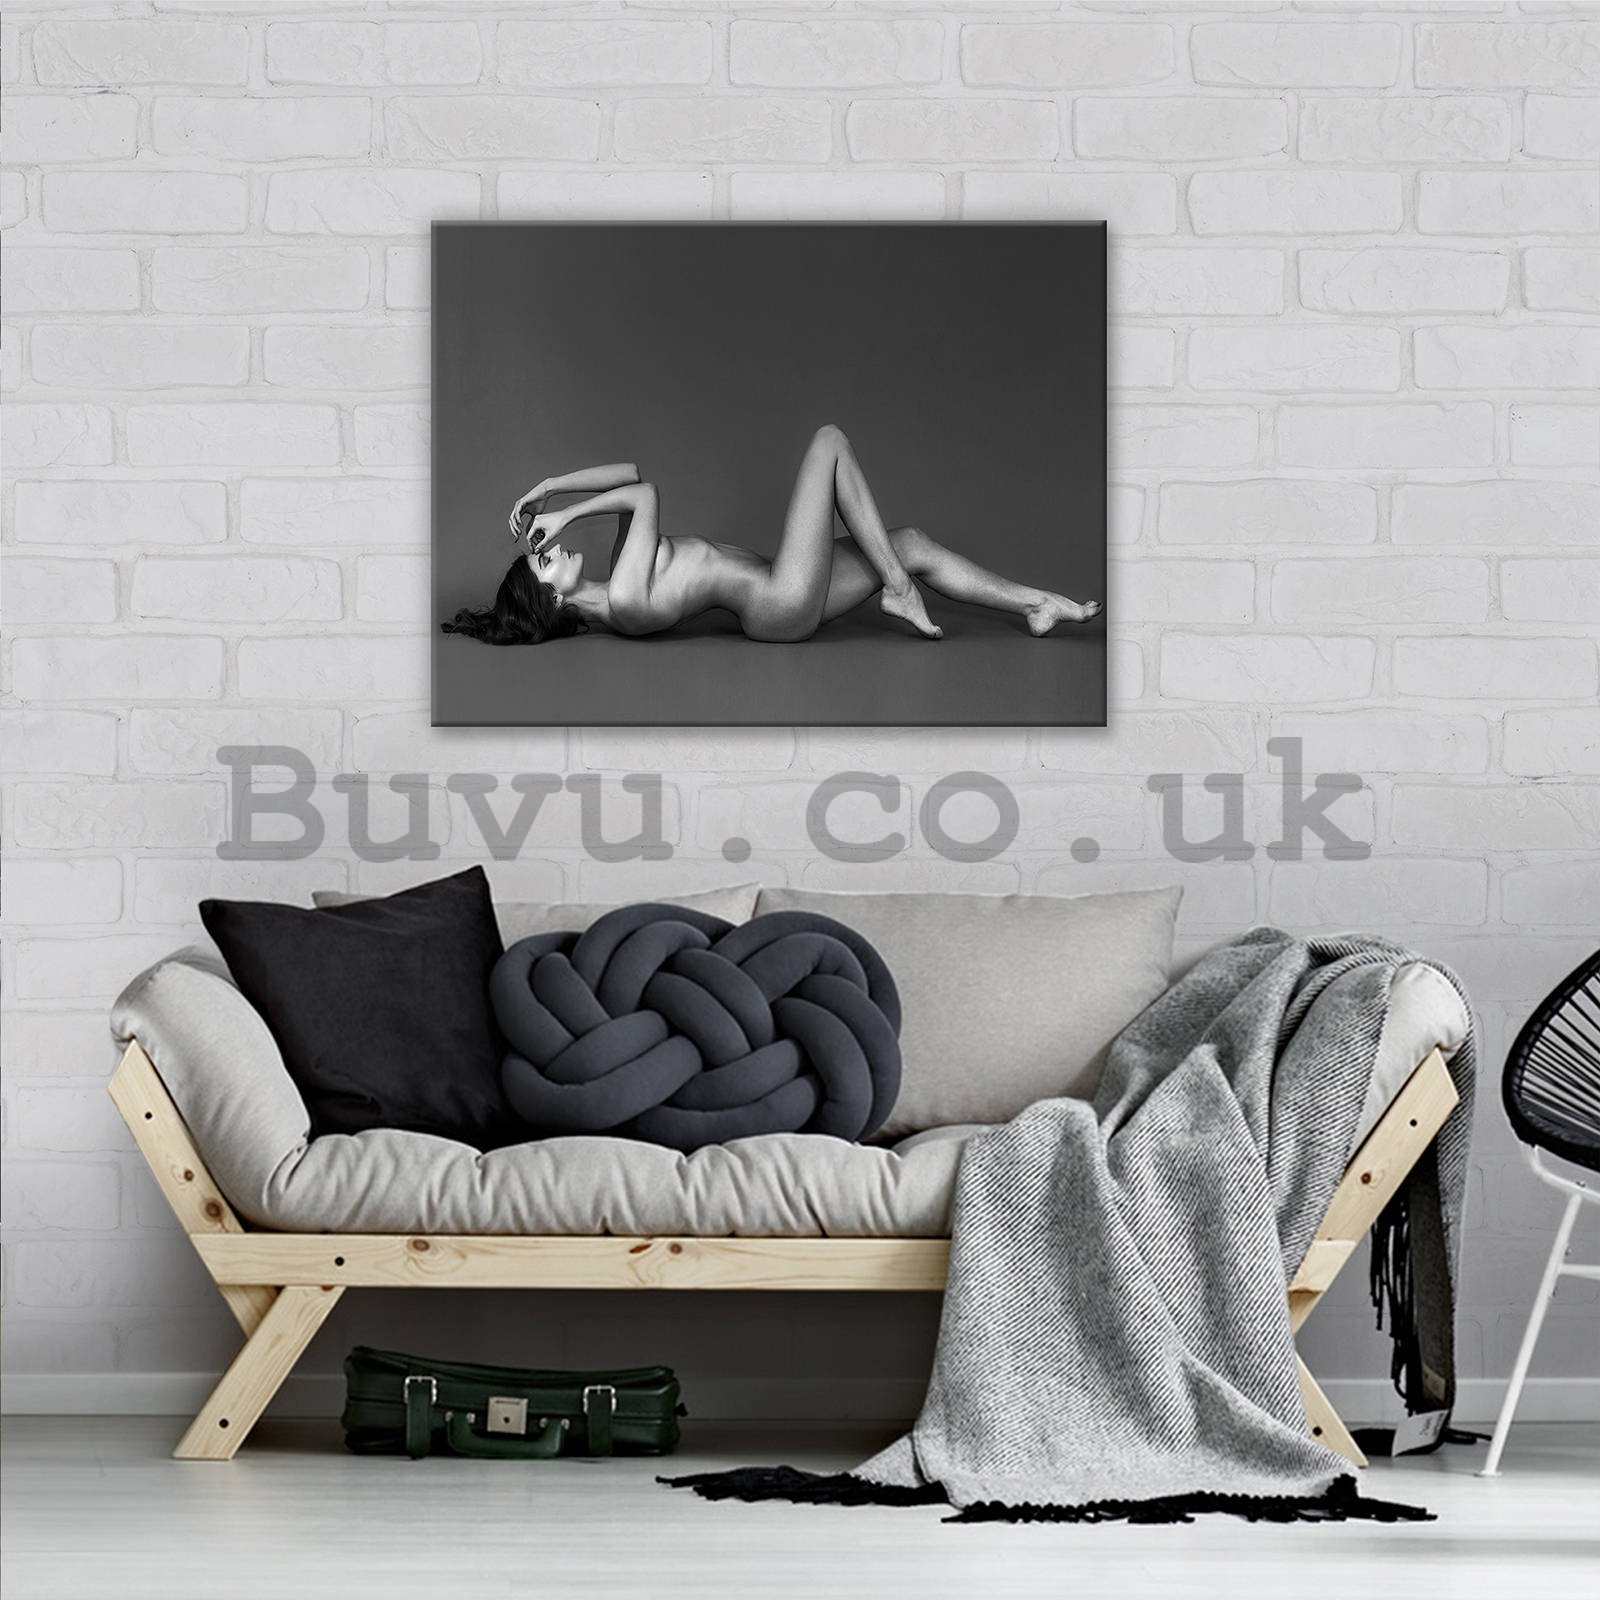 Painting on canvas: Erotic pose (1) - 80x60 cm